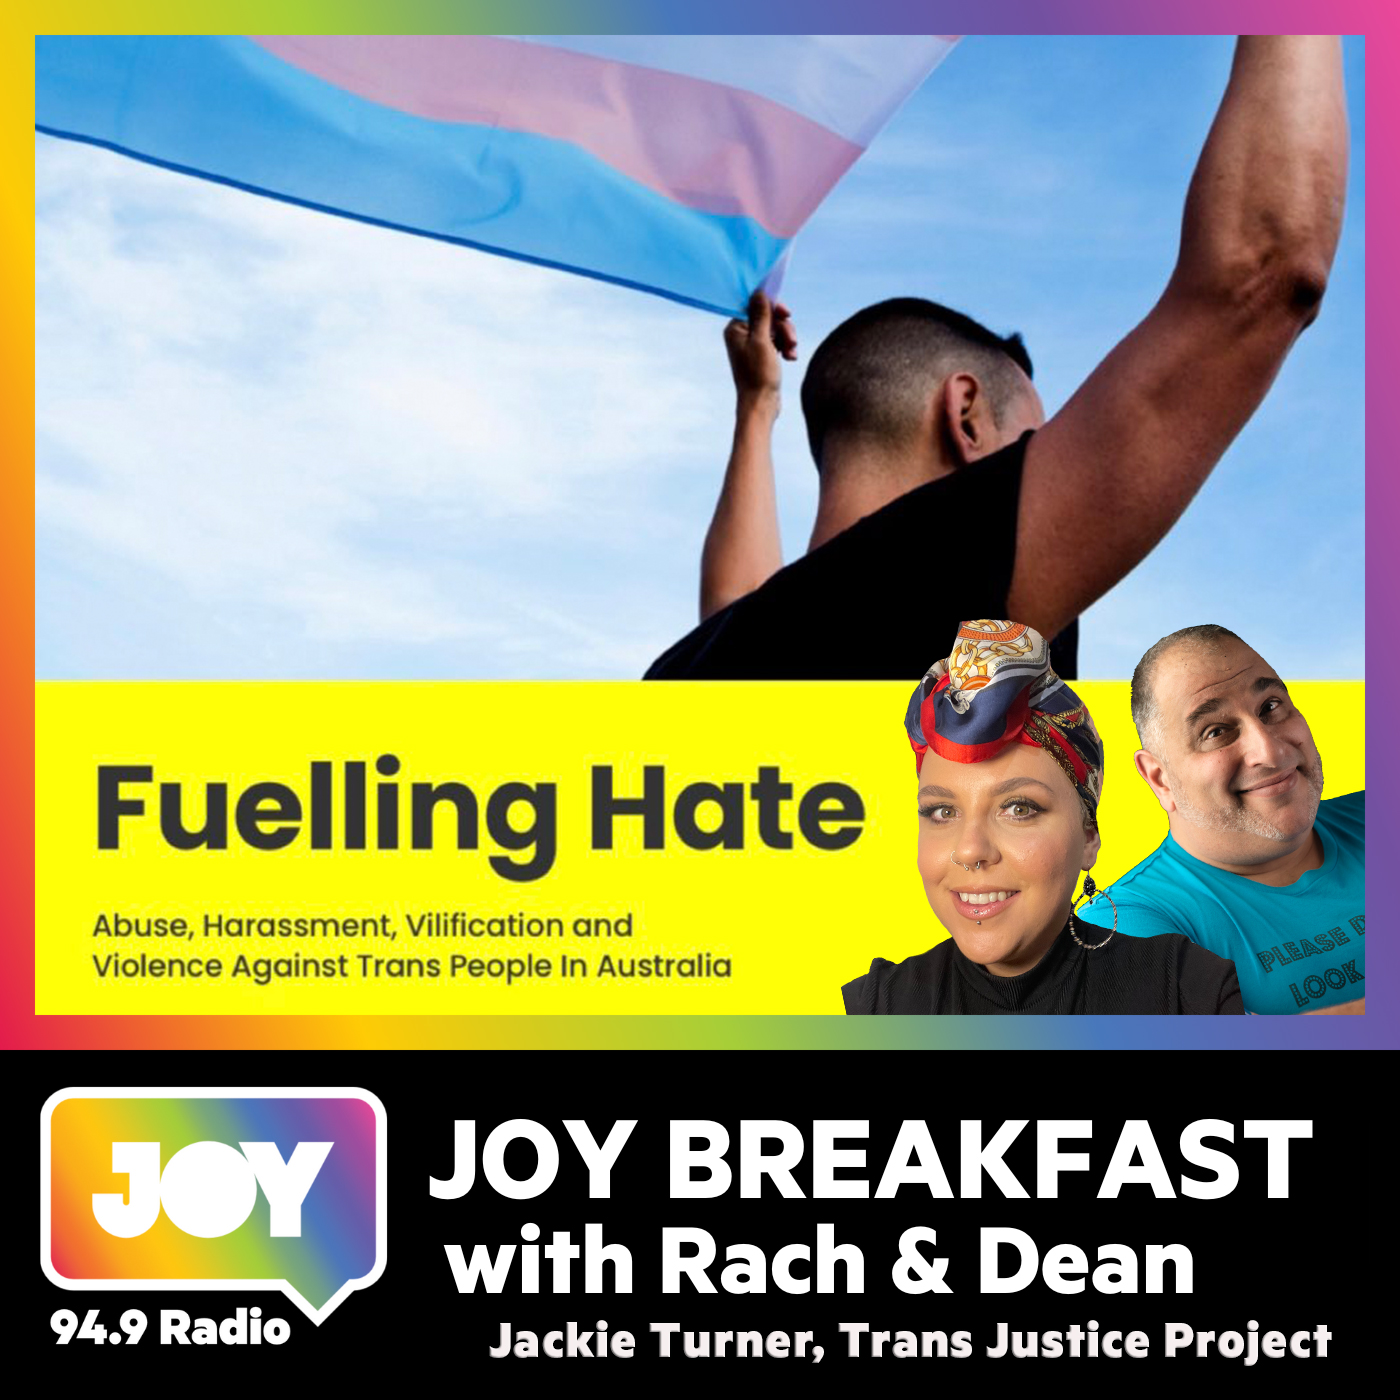 Fuelling Hate, the largest report of its kind, sees rise in transphobia in Aus